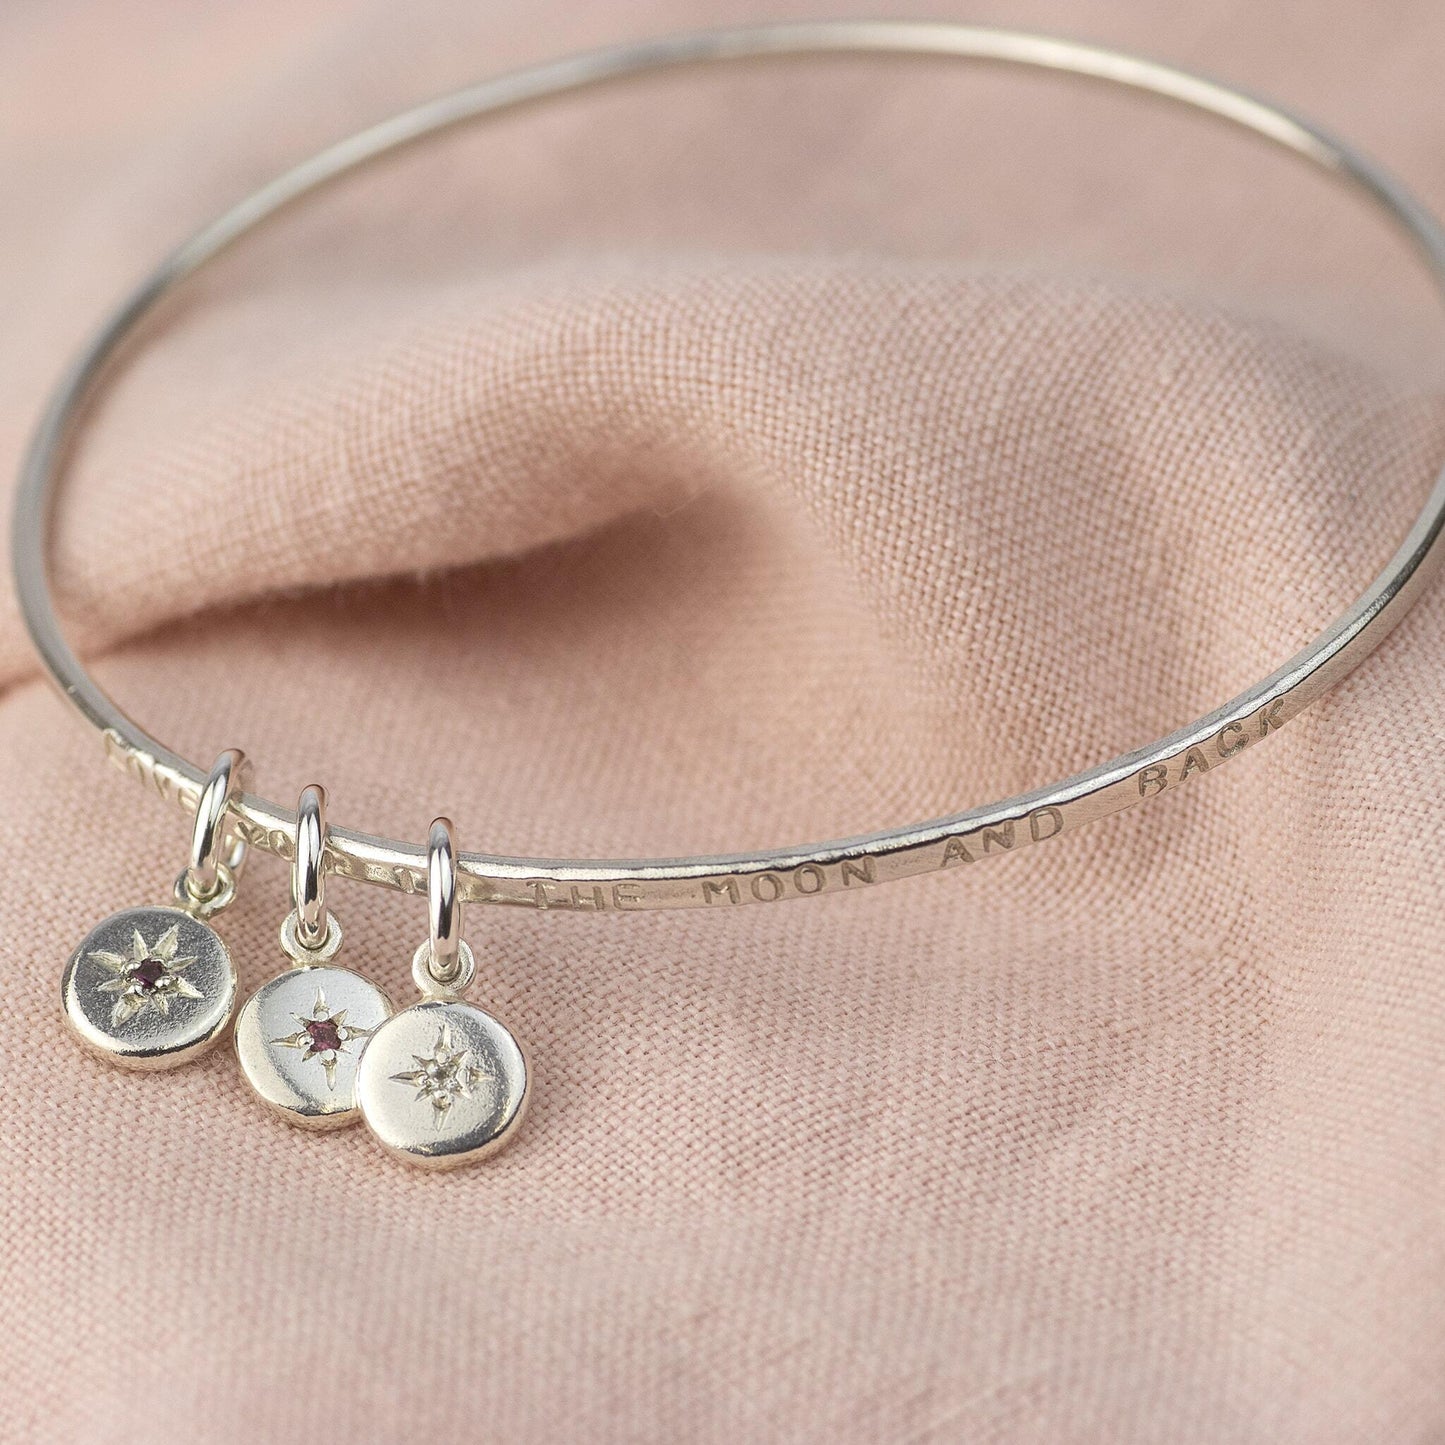 Personalised Family Birthstone Bangle - Birthstones for Loved Ones